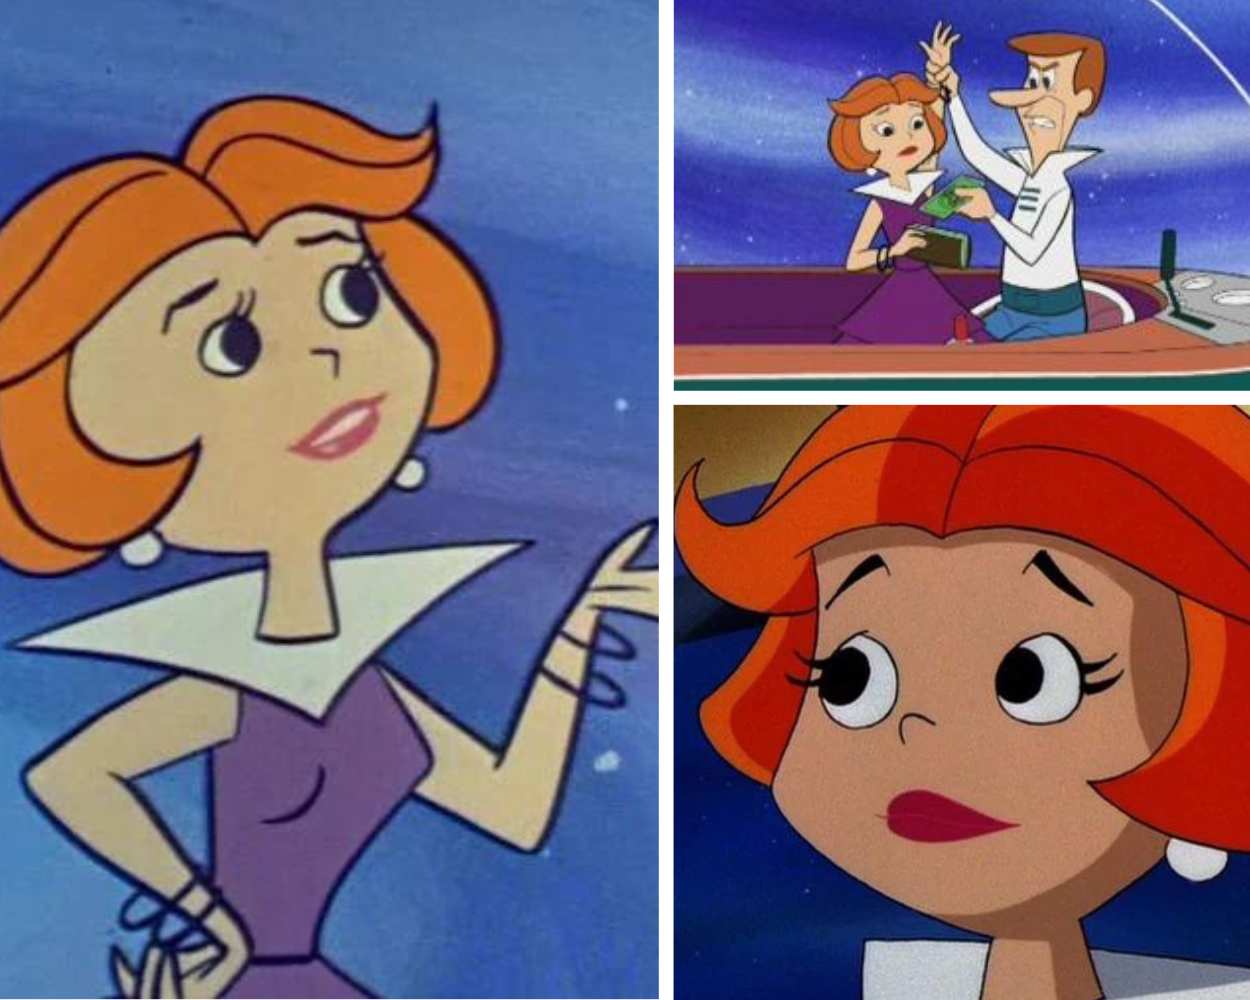 Jane Jetson - Old female characters